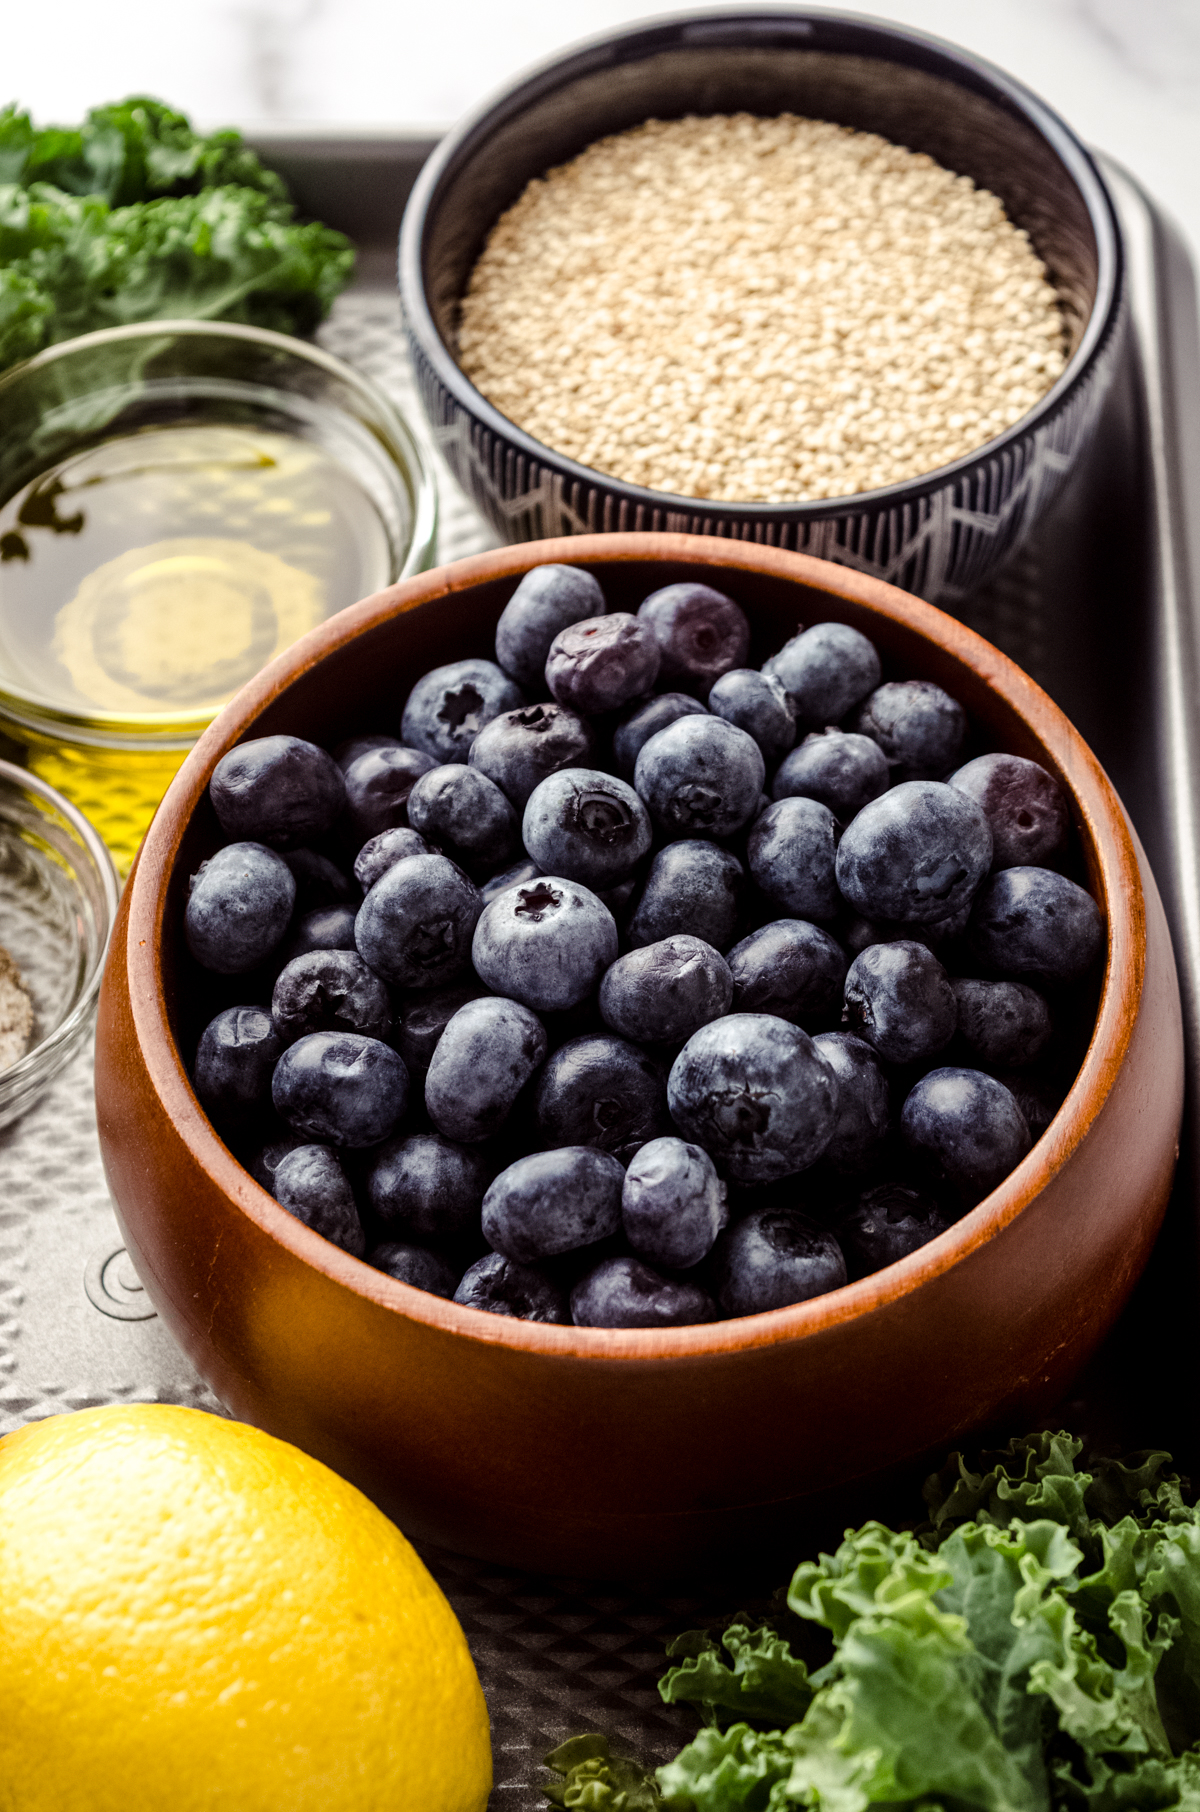 A bowl of blueberries on a surface with a lemon, quinoa, and olive oil in bowls around it.